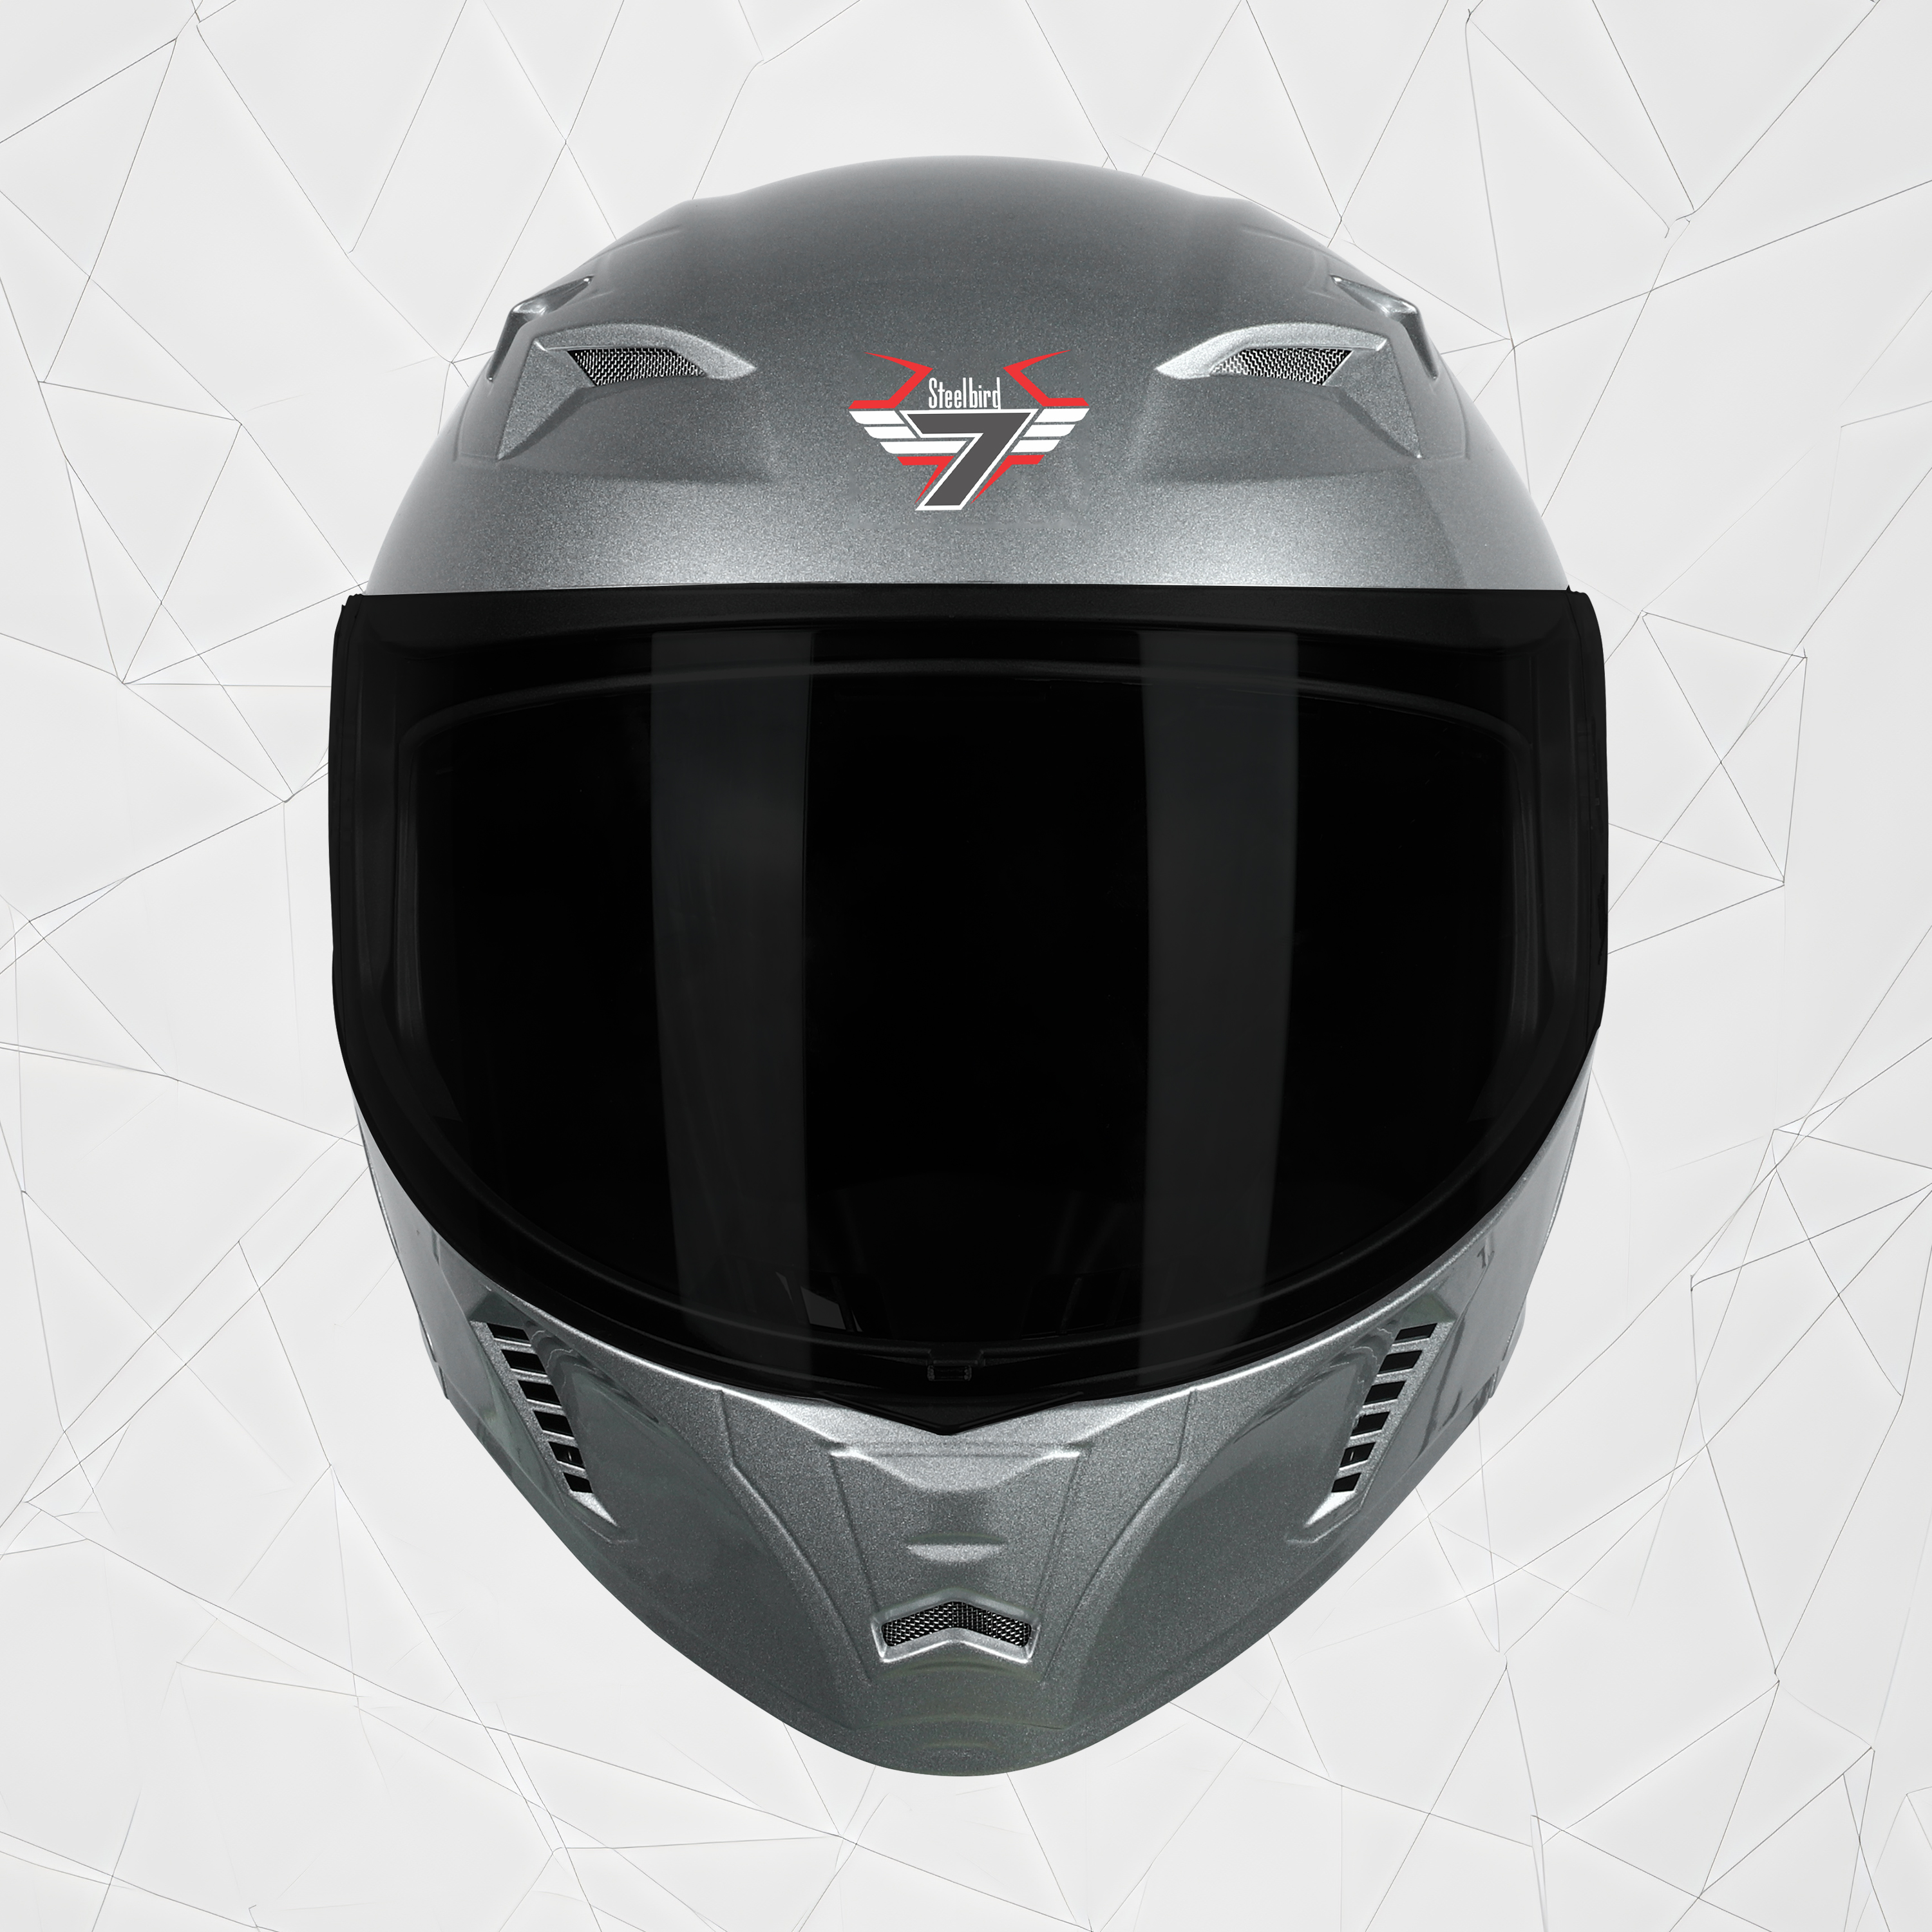 Steelbird SBA-20 7Wings ISI Certified Flip-Up Helmet With Black Spoiler For Men And Women With Inner Smoke Sun Shield (Glossy Silver With Smoke Visor)